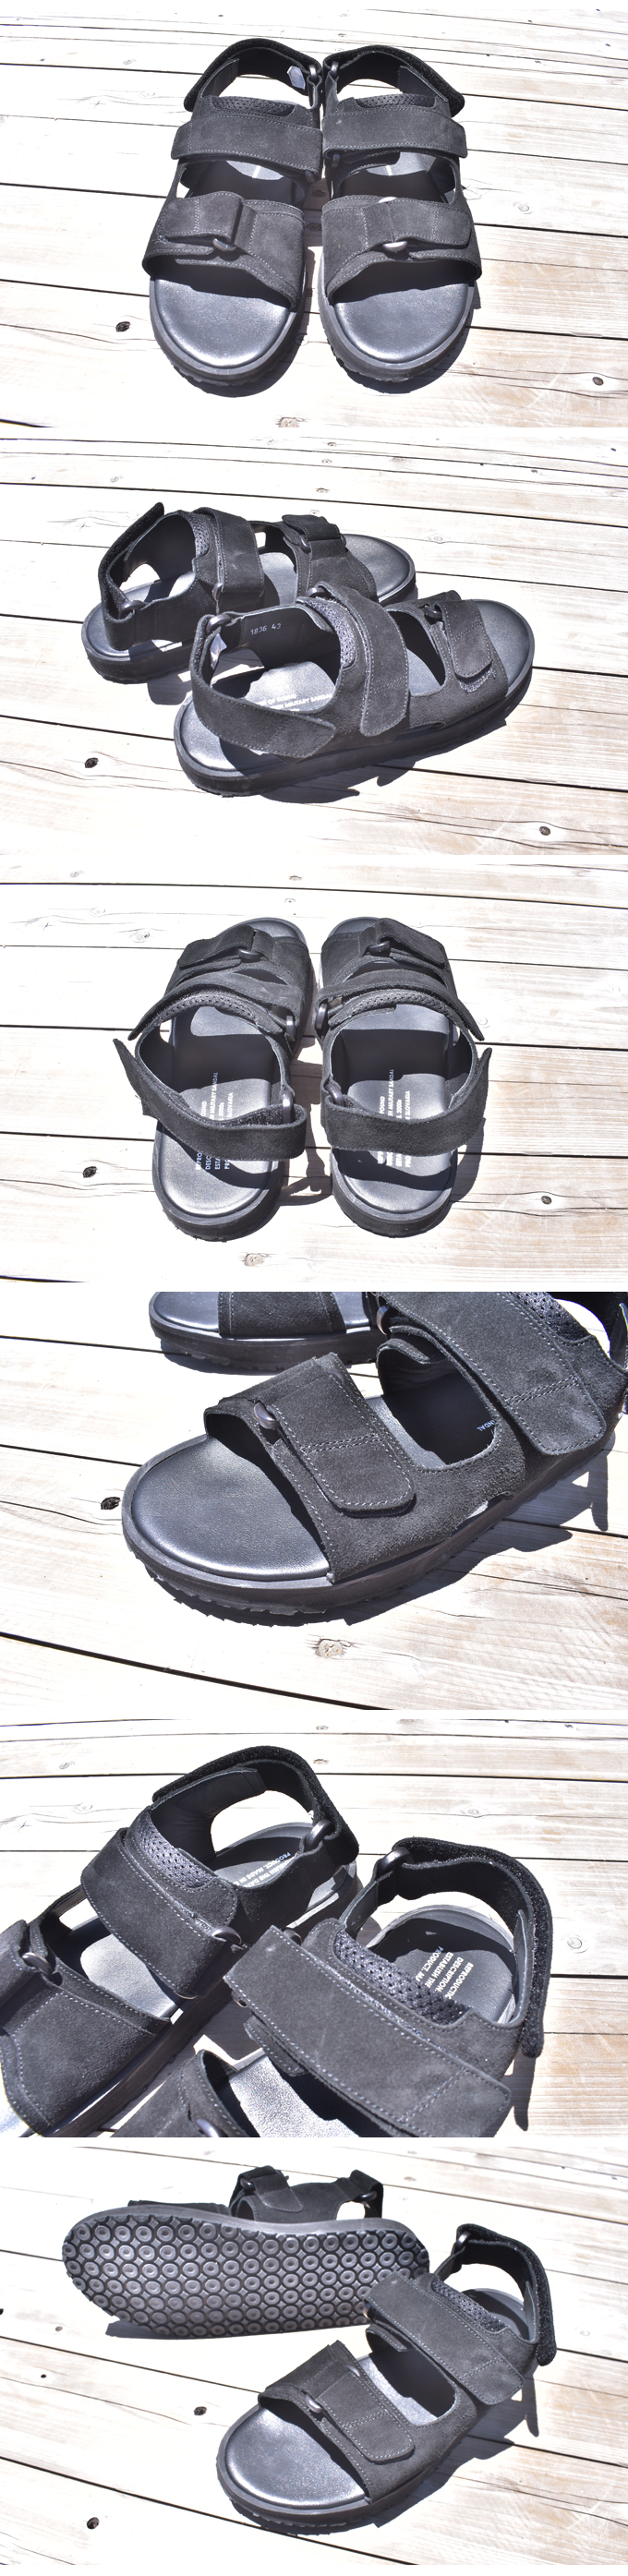 REPRODUCTION OF FOUND（ZDA) BRITISH MILITARY SANDAL